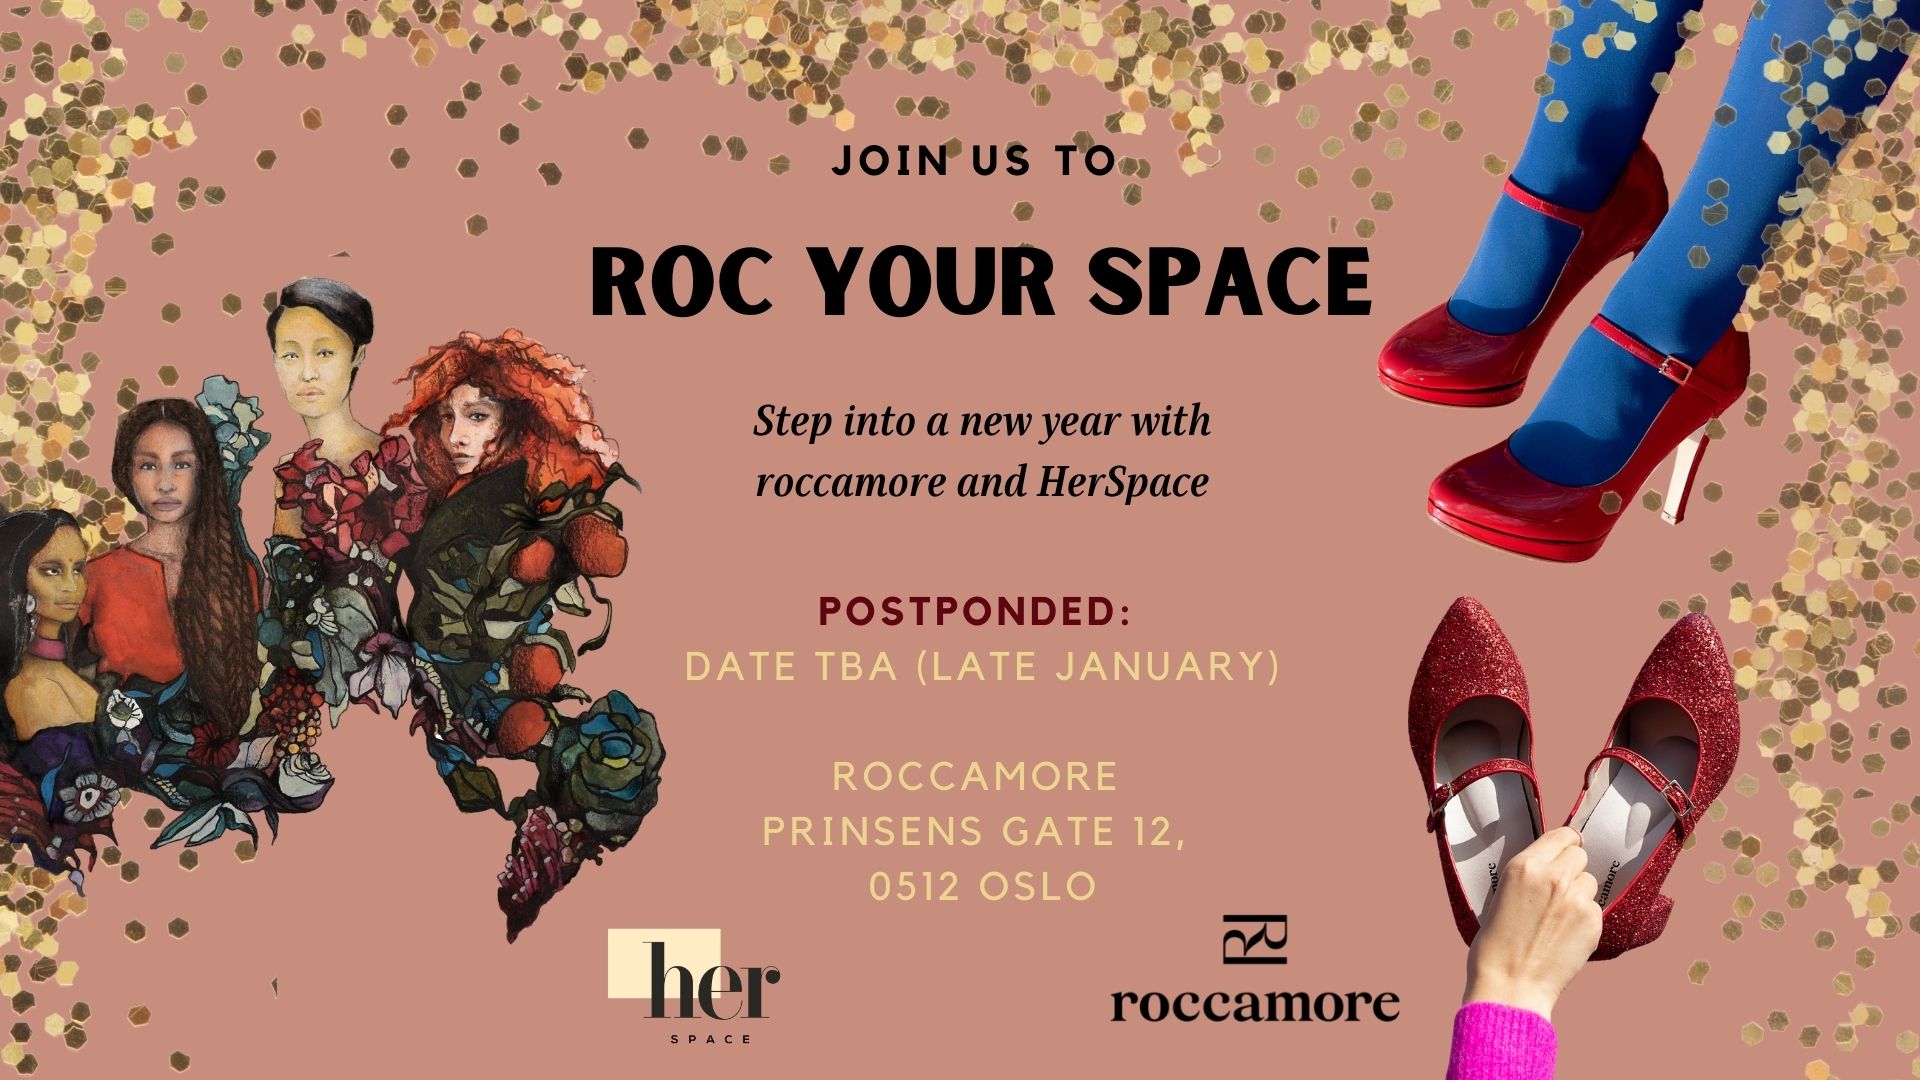 Tolkning afkom mave Roc Your Space: Start the year by celebrating with roccamore and HerSpace -  HerSpace